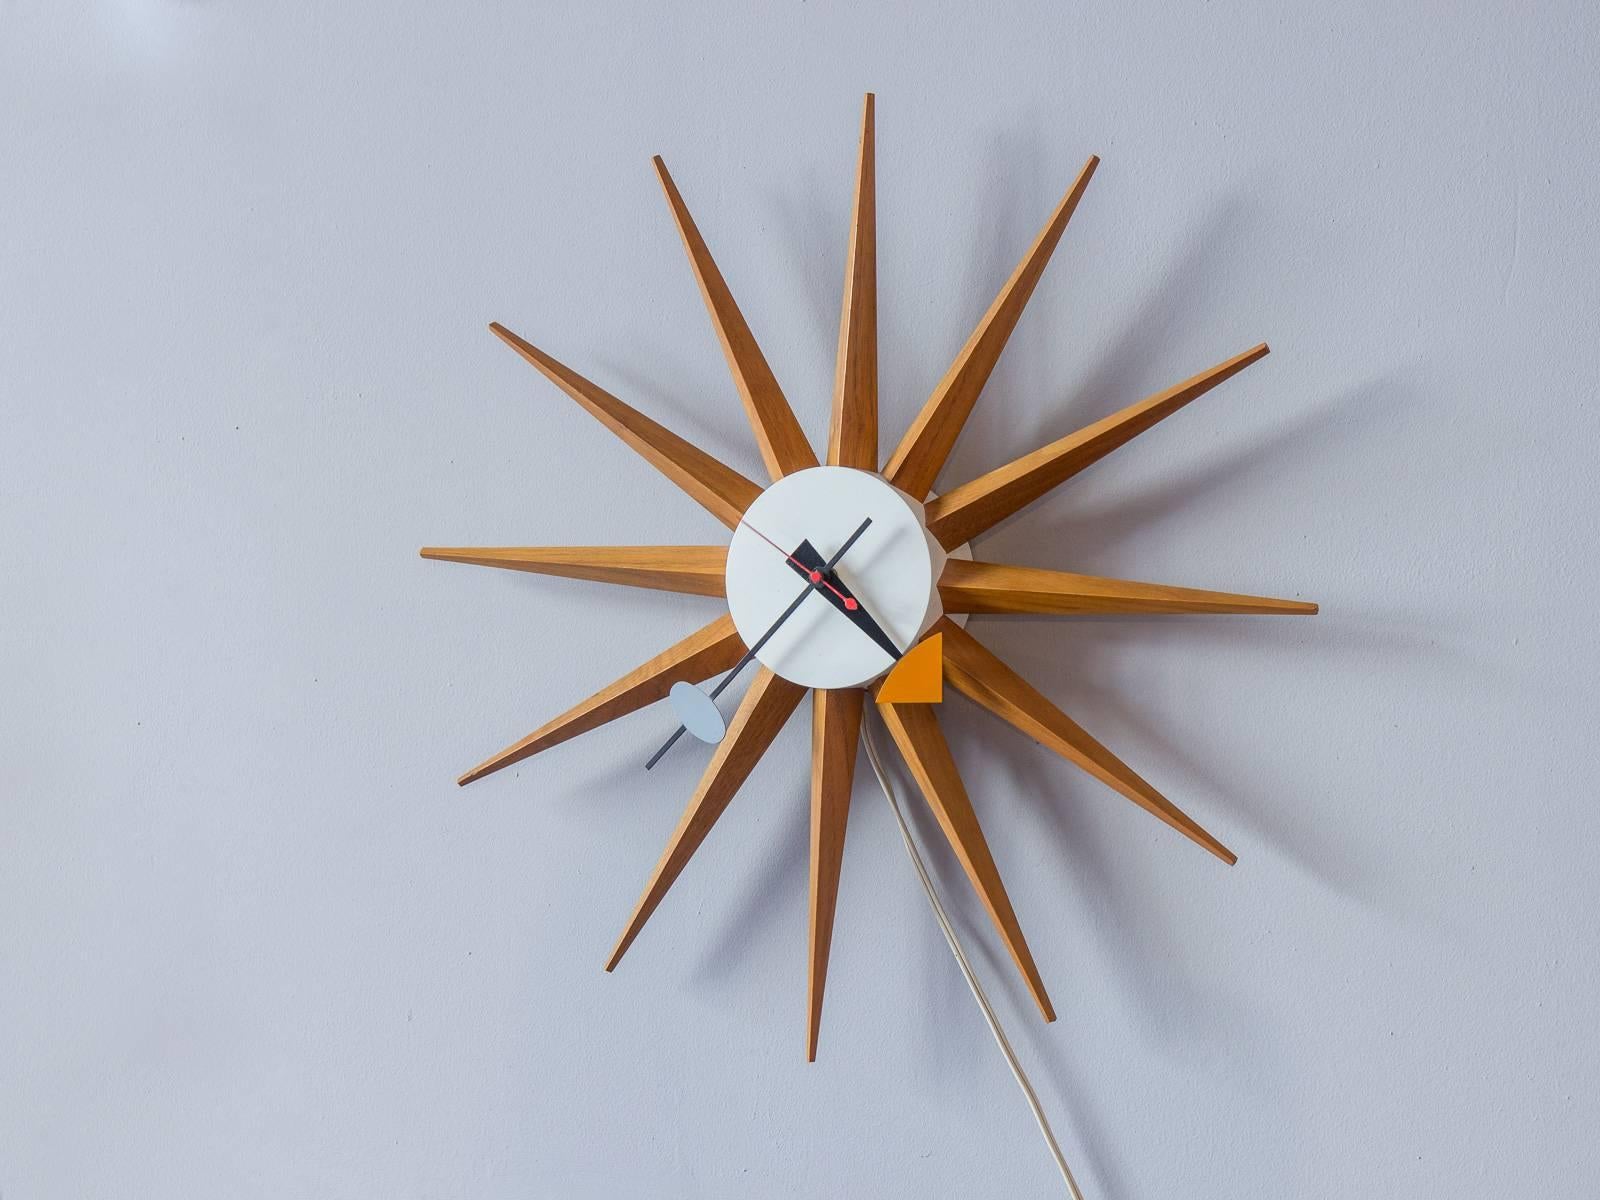 Gorgeous sunburst wall clock designed by George Nelson Associates for the Howard Miller Clock Co., circa 1949. The clock plugs in, has enameled hands, and is in excellent vintage condition.

18.5